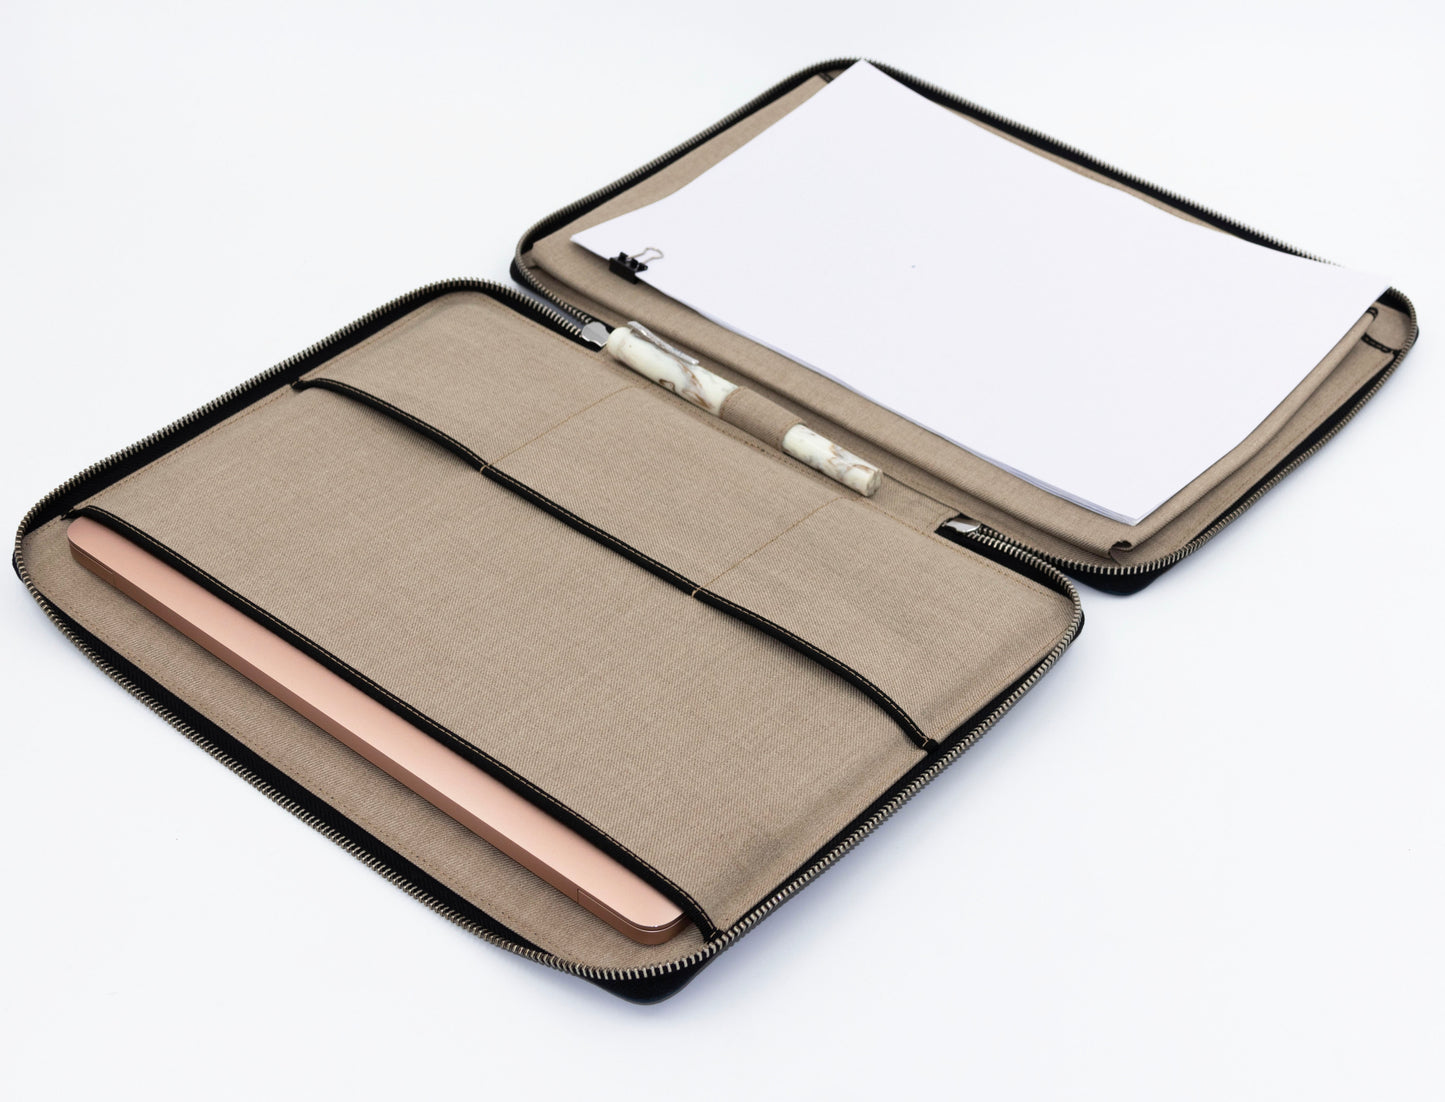 The interior unzips to lay completely flat on a table. One can place a writing pad on it